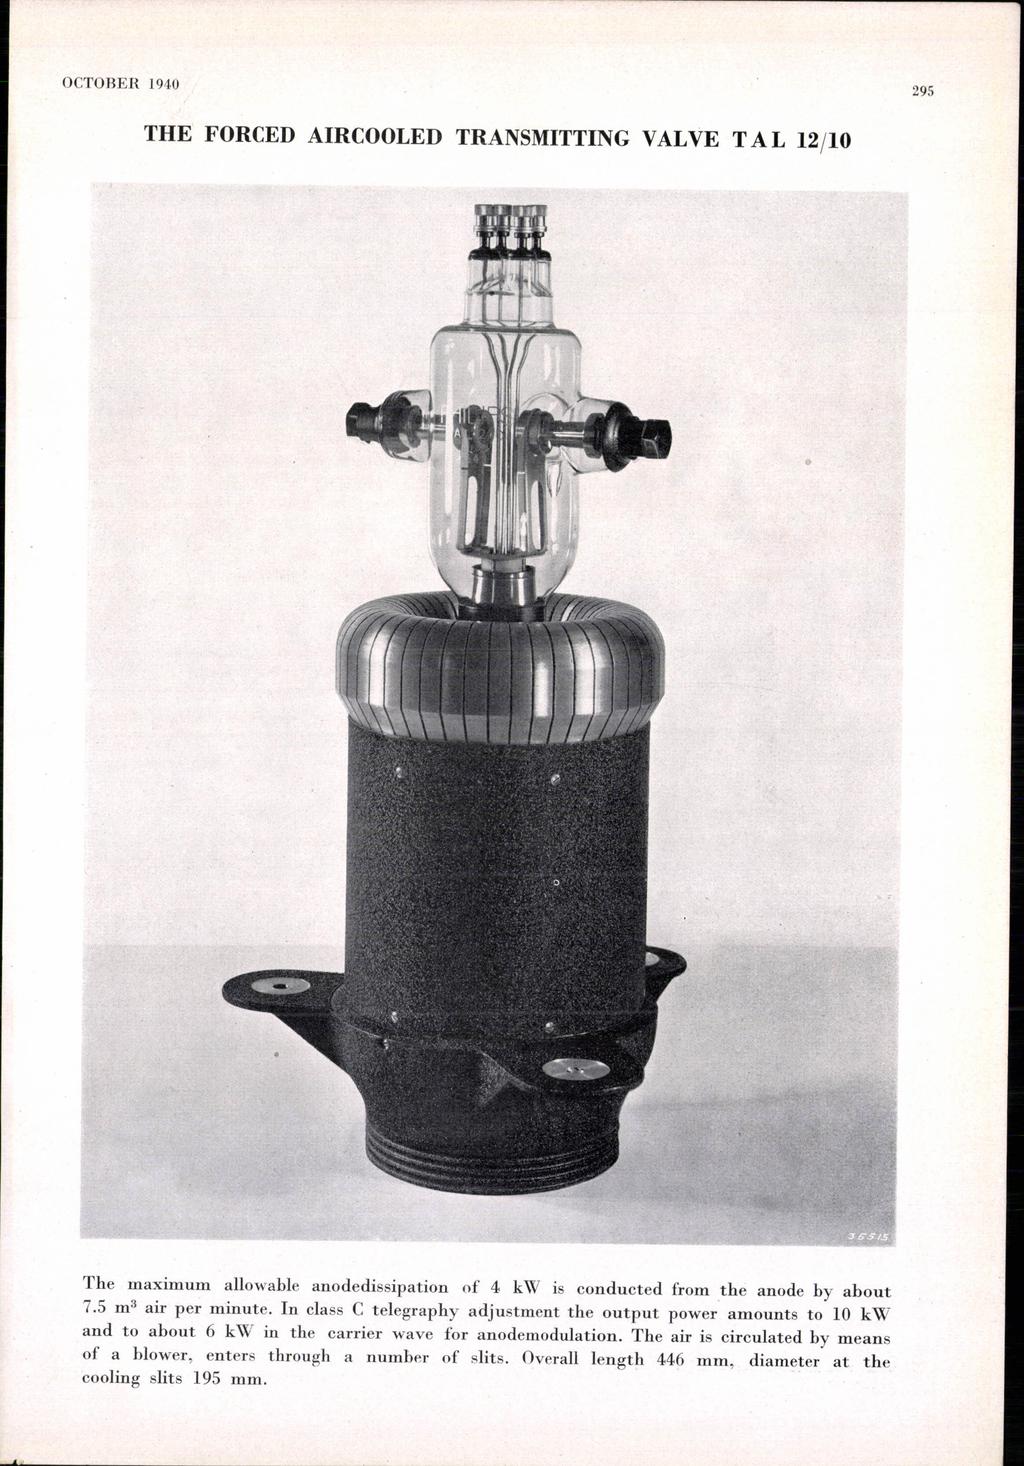 OCTOBER 1940 295 THE FORCED AIRCOOLED TRANSMITTING VALVE TAL 12/10 The maximum allowable anodedissipation of 4 kw is conducted from the anode by about 7.5 m 3 air per minute.